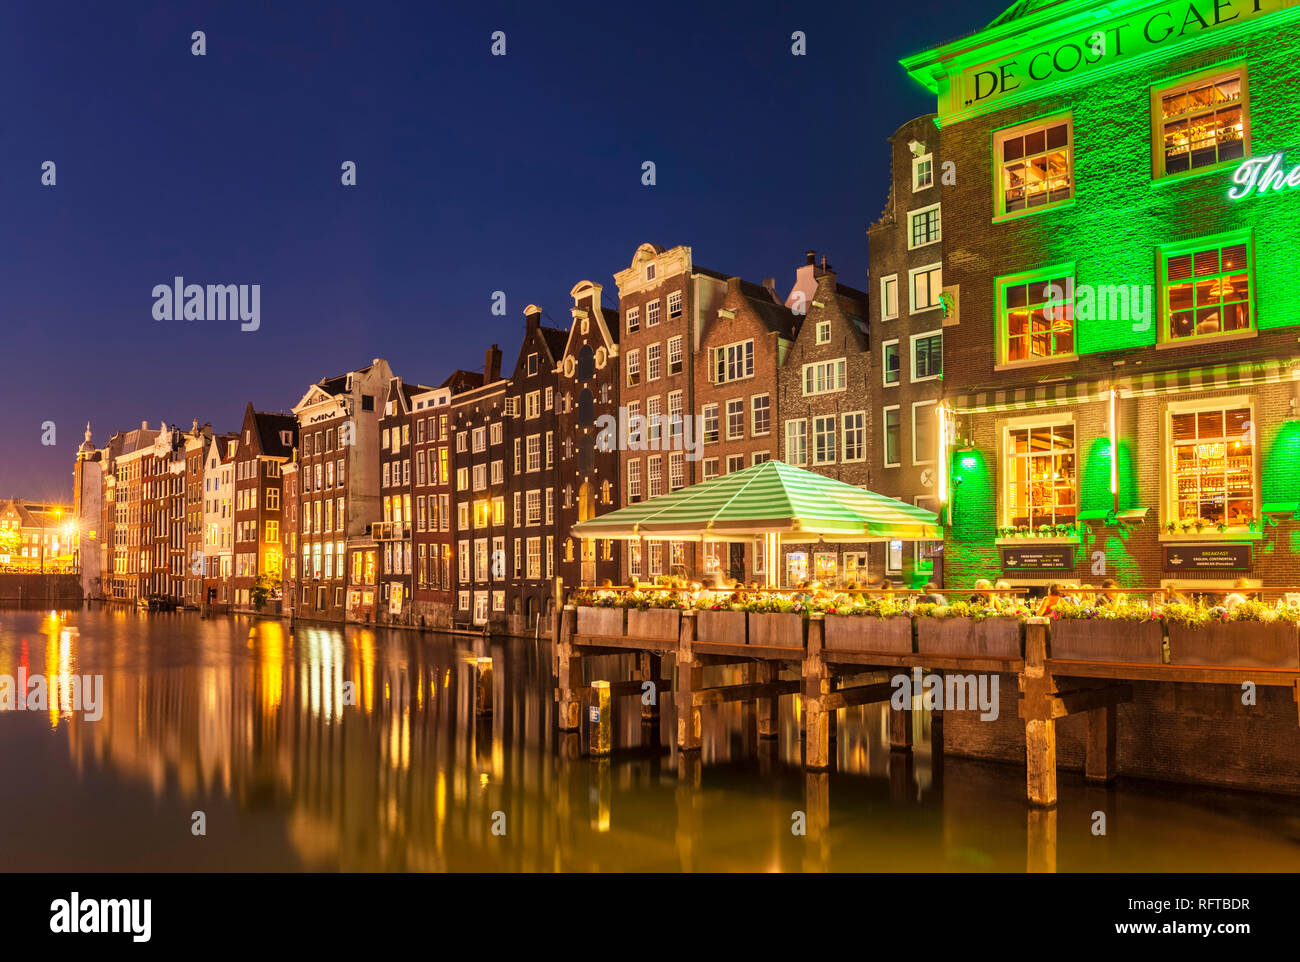 The Grasshopper steakhouse on Oudebrugsteeg Damrak canal with typical dutch houses, central Amsterdam, North Holland, Netherlands, Europe Stock Photo